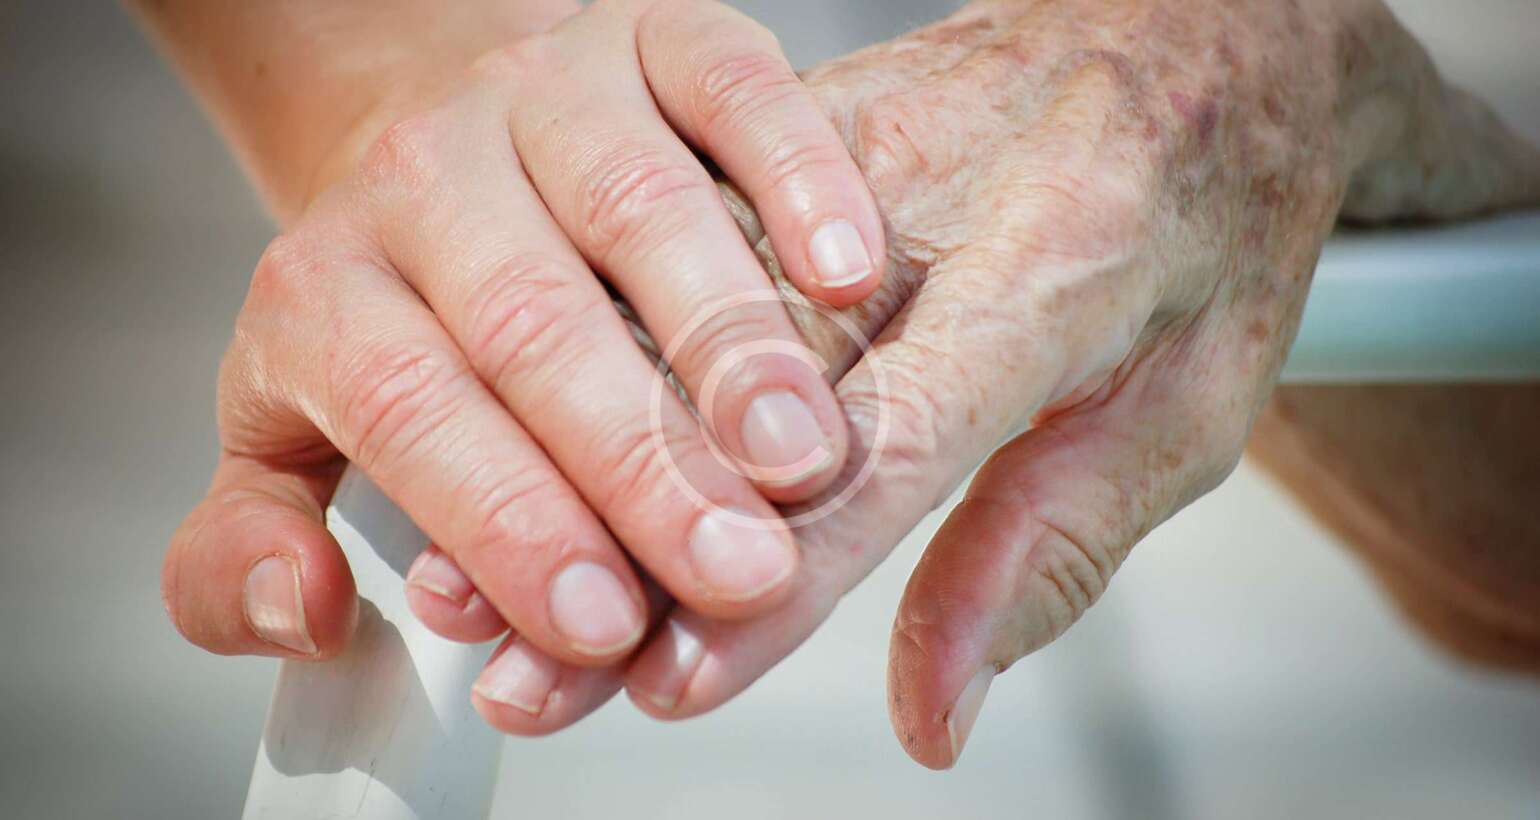 Holding hands of elderly person